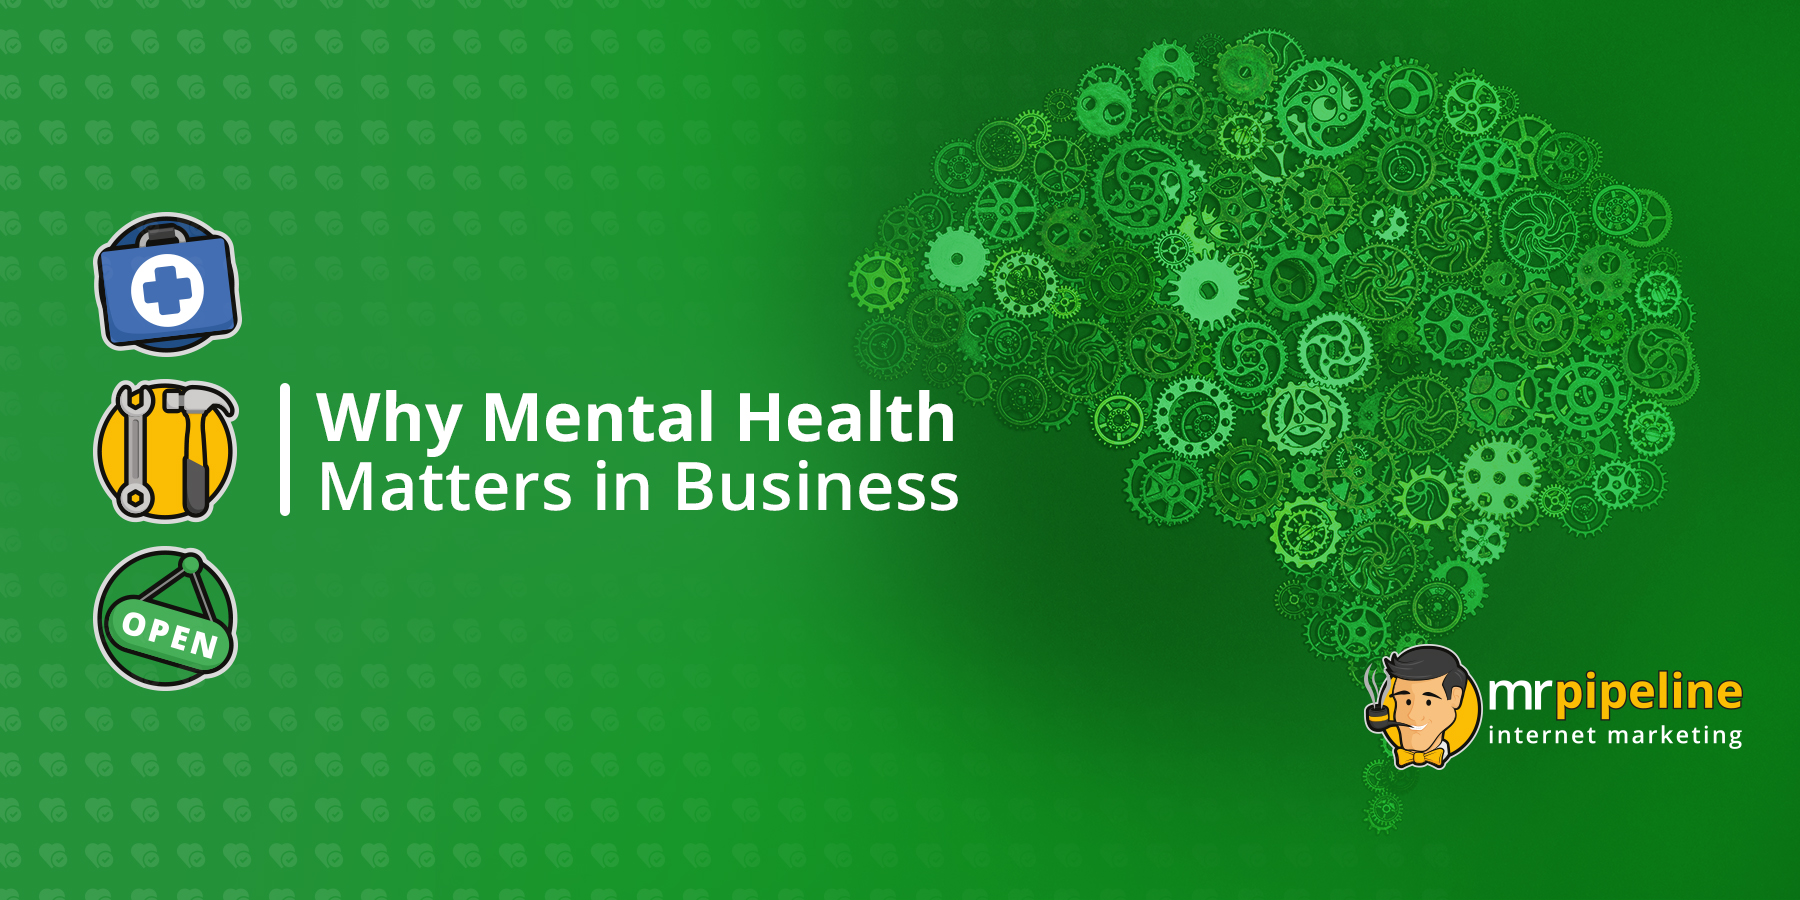 Why Mental Health Matters in Business